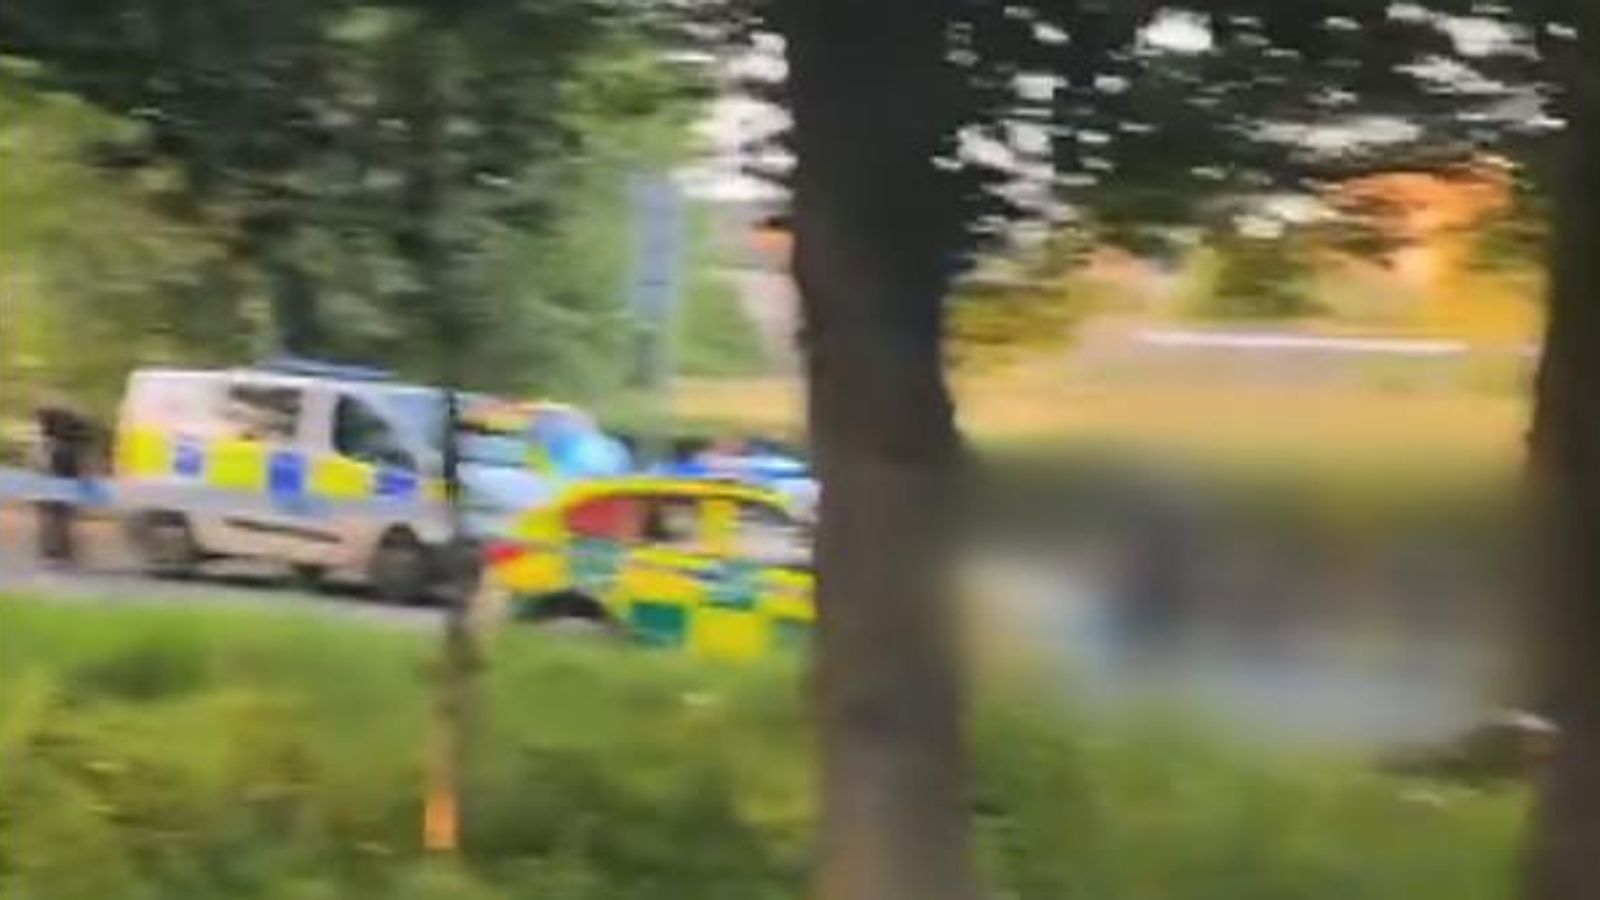 Boy in critical condition after being hit by police van responding to emergency call